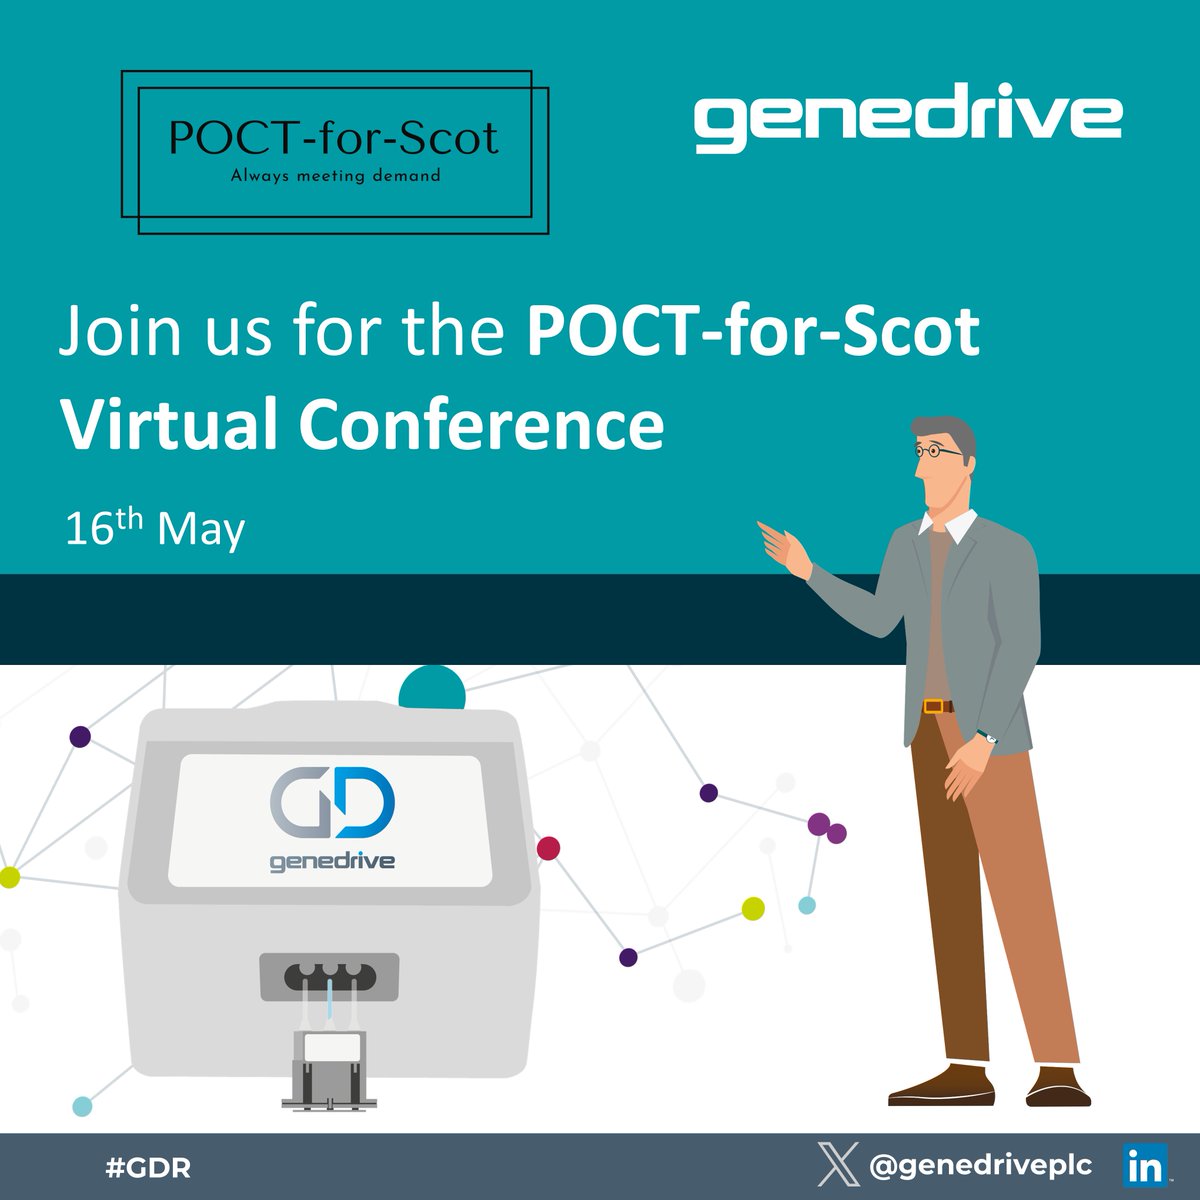 Join us online NEXT WEEK for the POCT-for-Scot virtual conference!

Professor Bill Newman will be speaking on the Genedrive MT-RNR1 ID Kit at 1:30pm.

We hope to see you there!

#GDR #POCT #pointofcare #POCTforScot #diagnostics #neonatal #diagnostics #pharmacogenomics